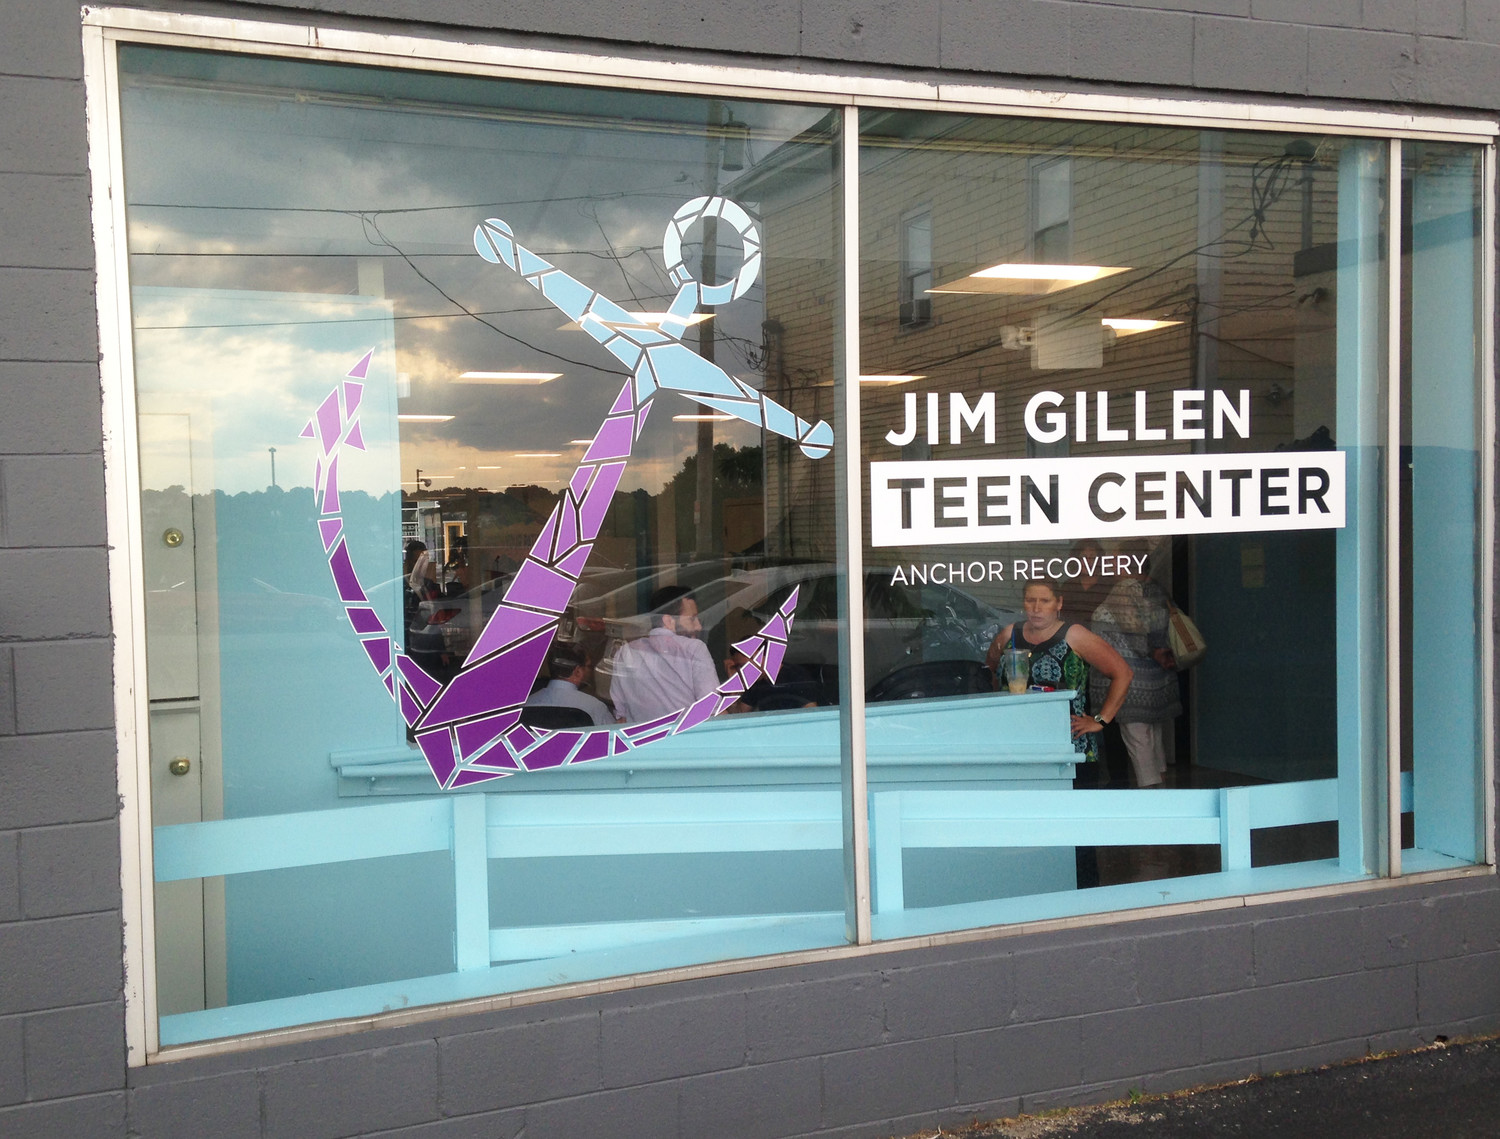 The back entrance to the Jim Gillen Teen Center, which celebrating its grand opening on Thursday, June 22.